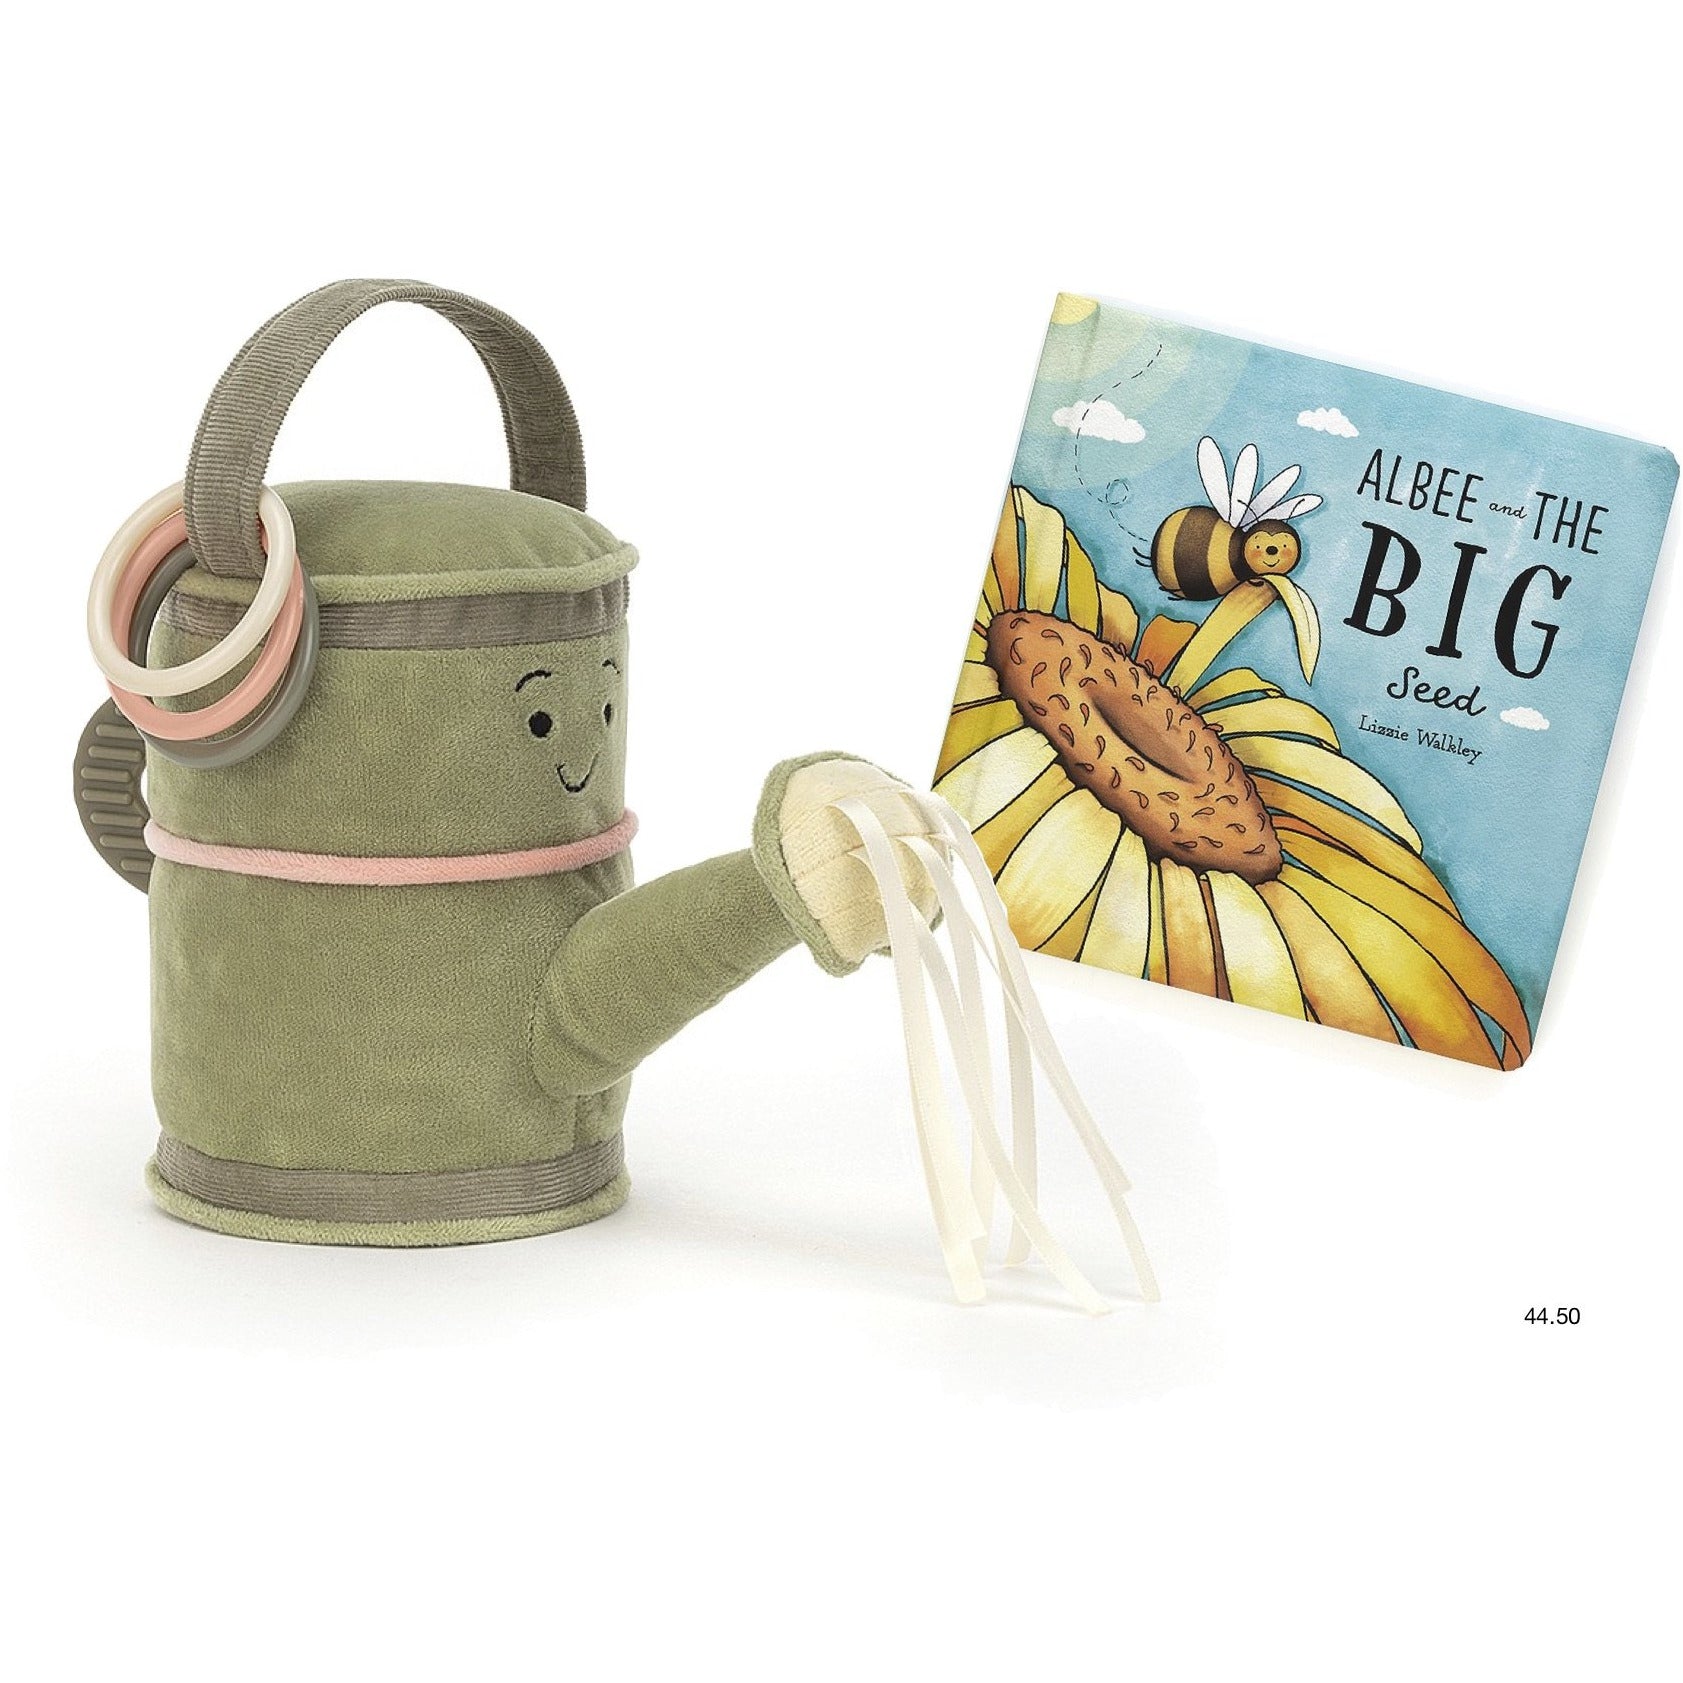 Whimsy Garden Watering Can + Albee And The Big Seed Book